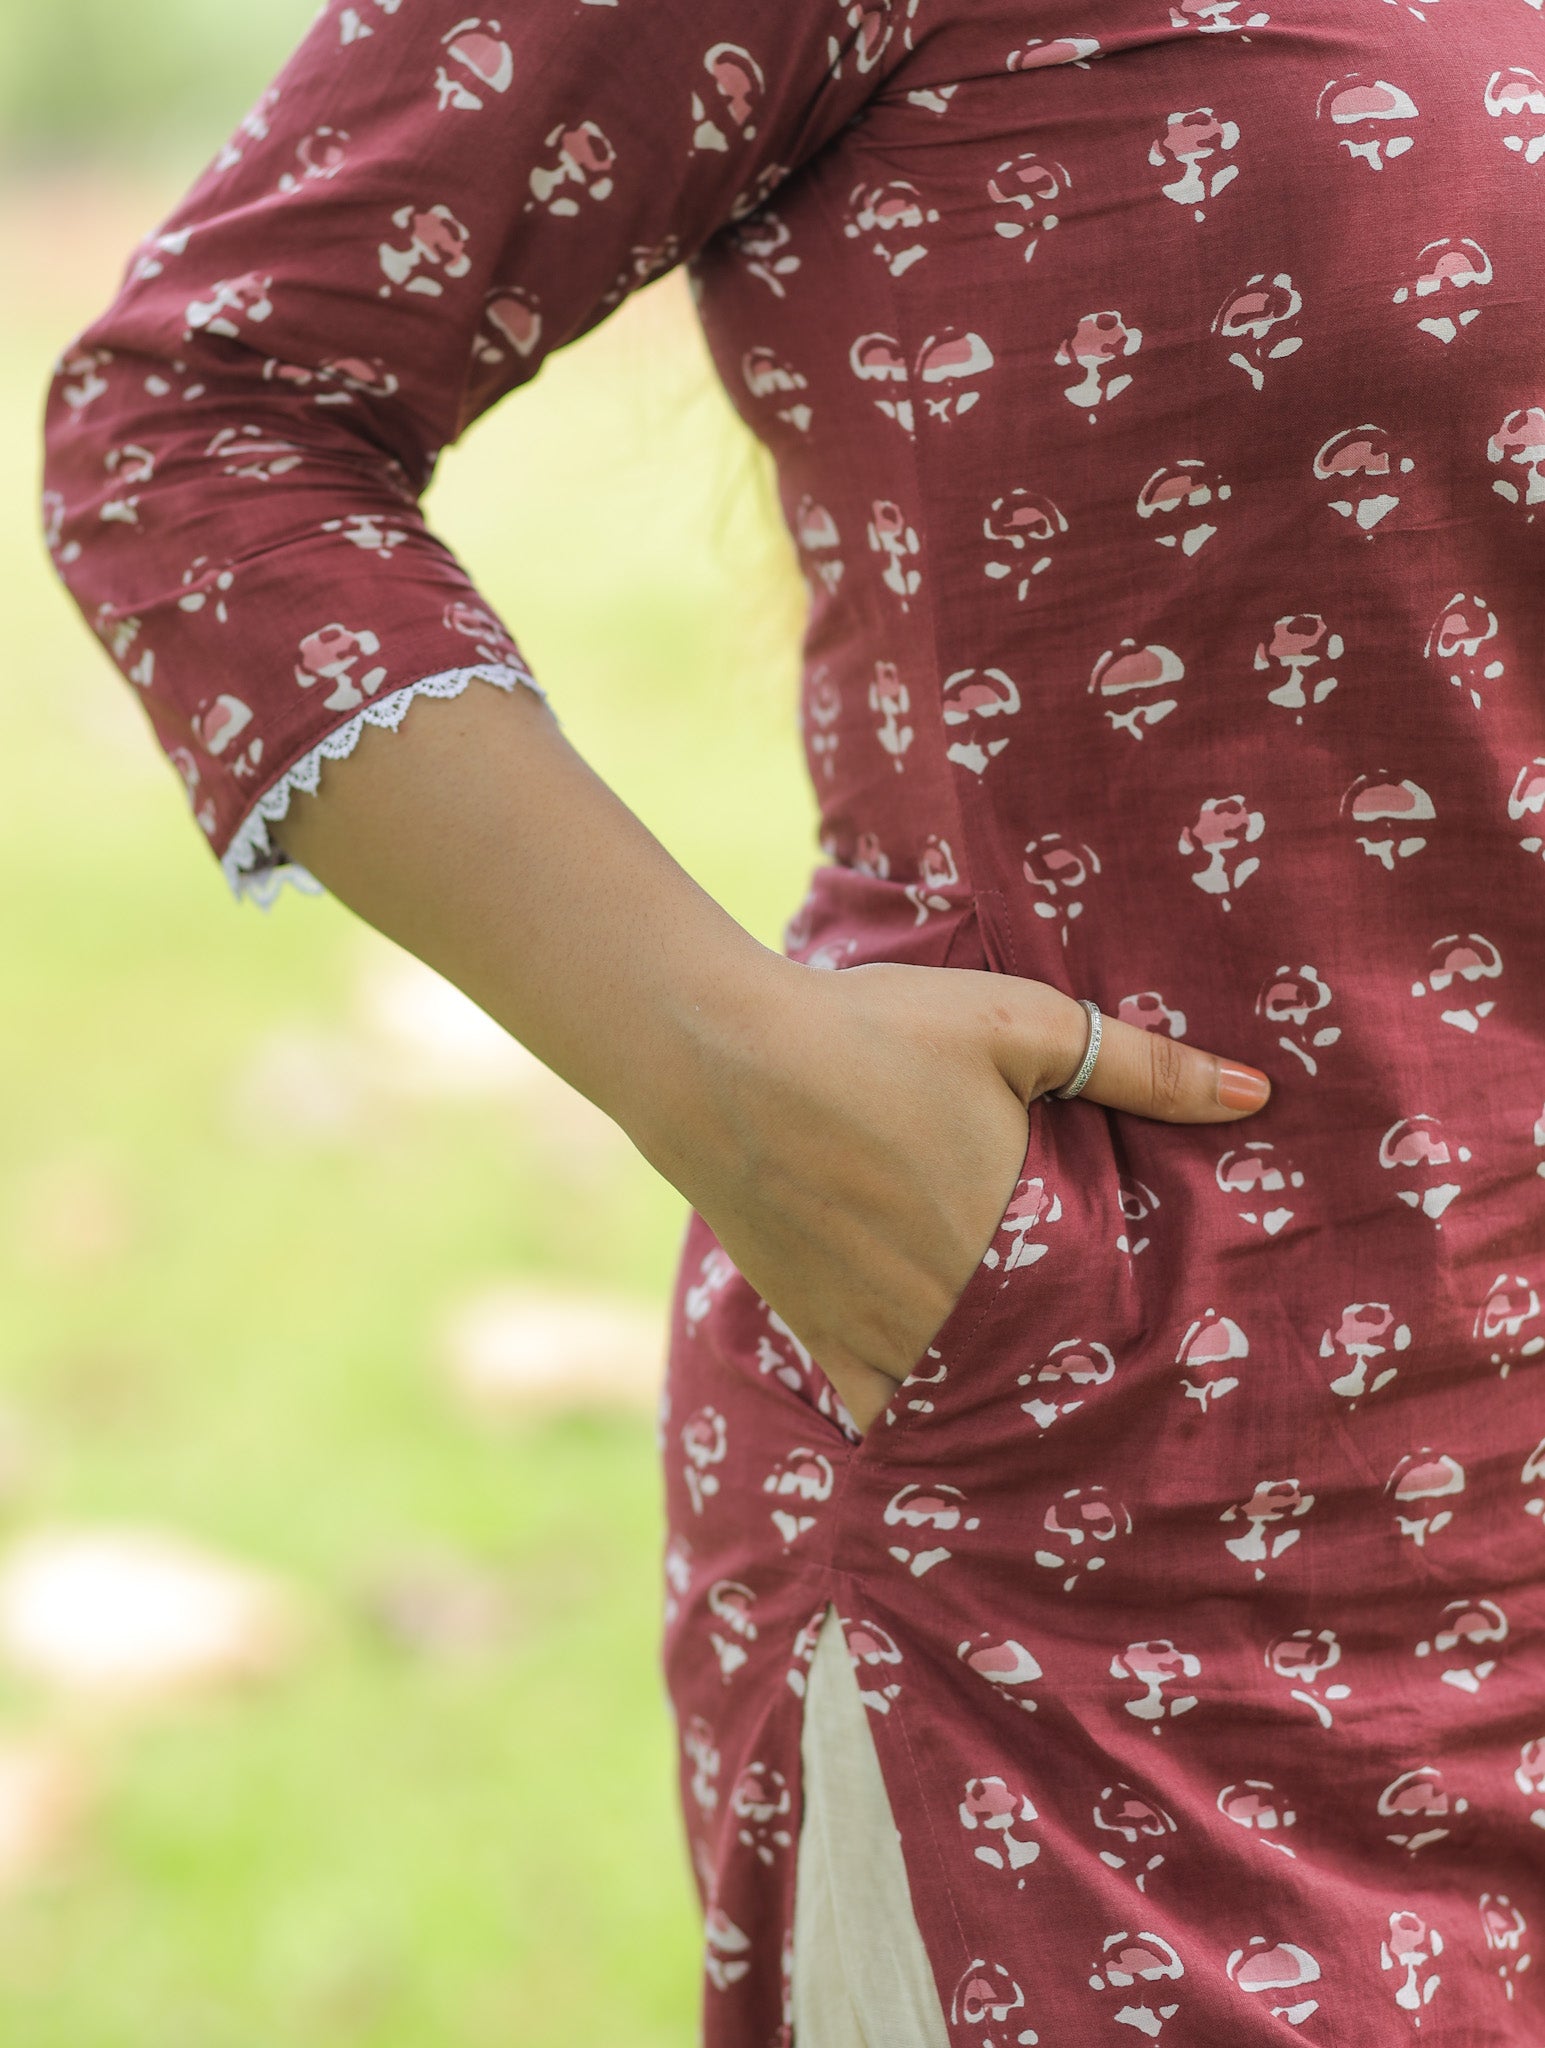 Brick red printed kurta with lace details and pocket.